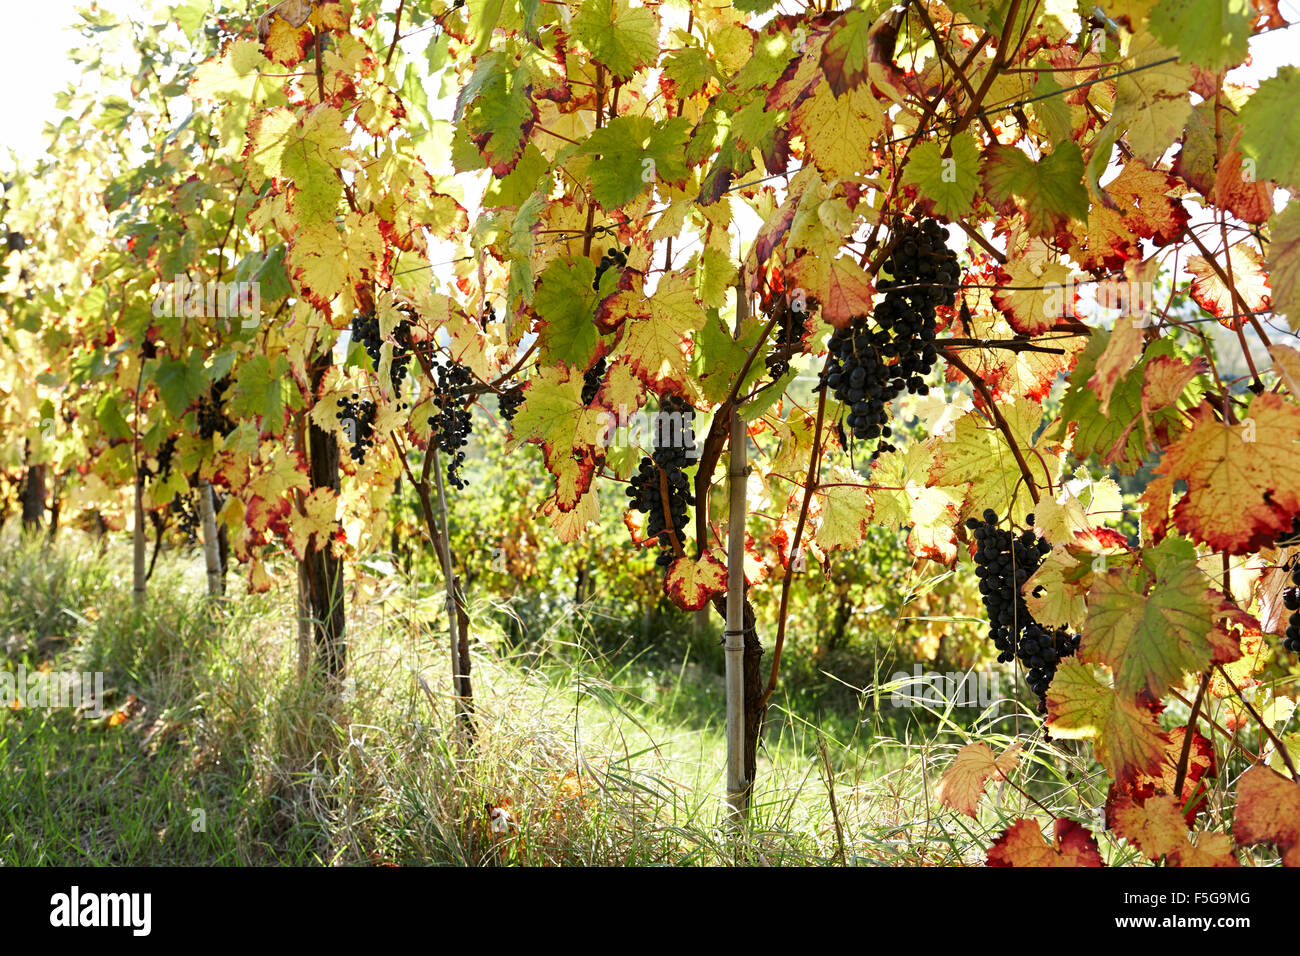 Red grapes growing on the vines in the early autumnal sunshine. Stock Photo